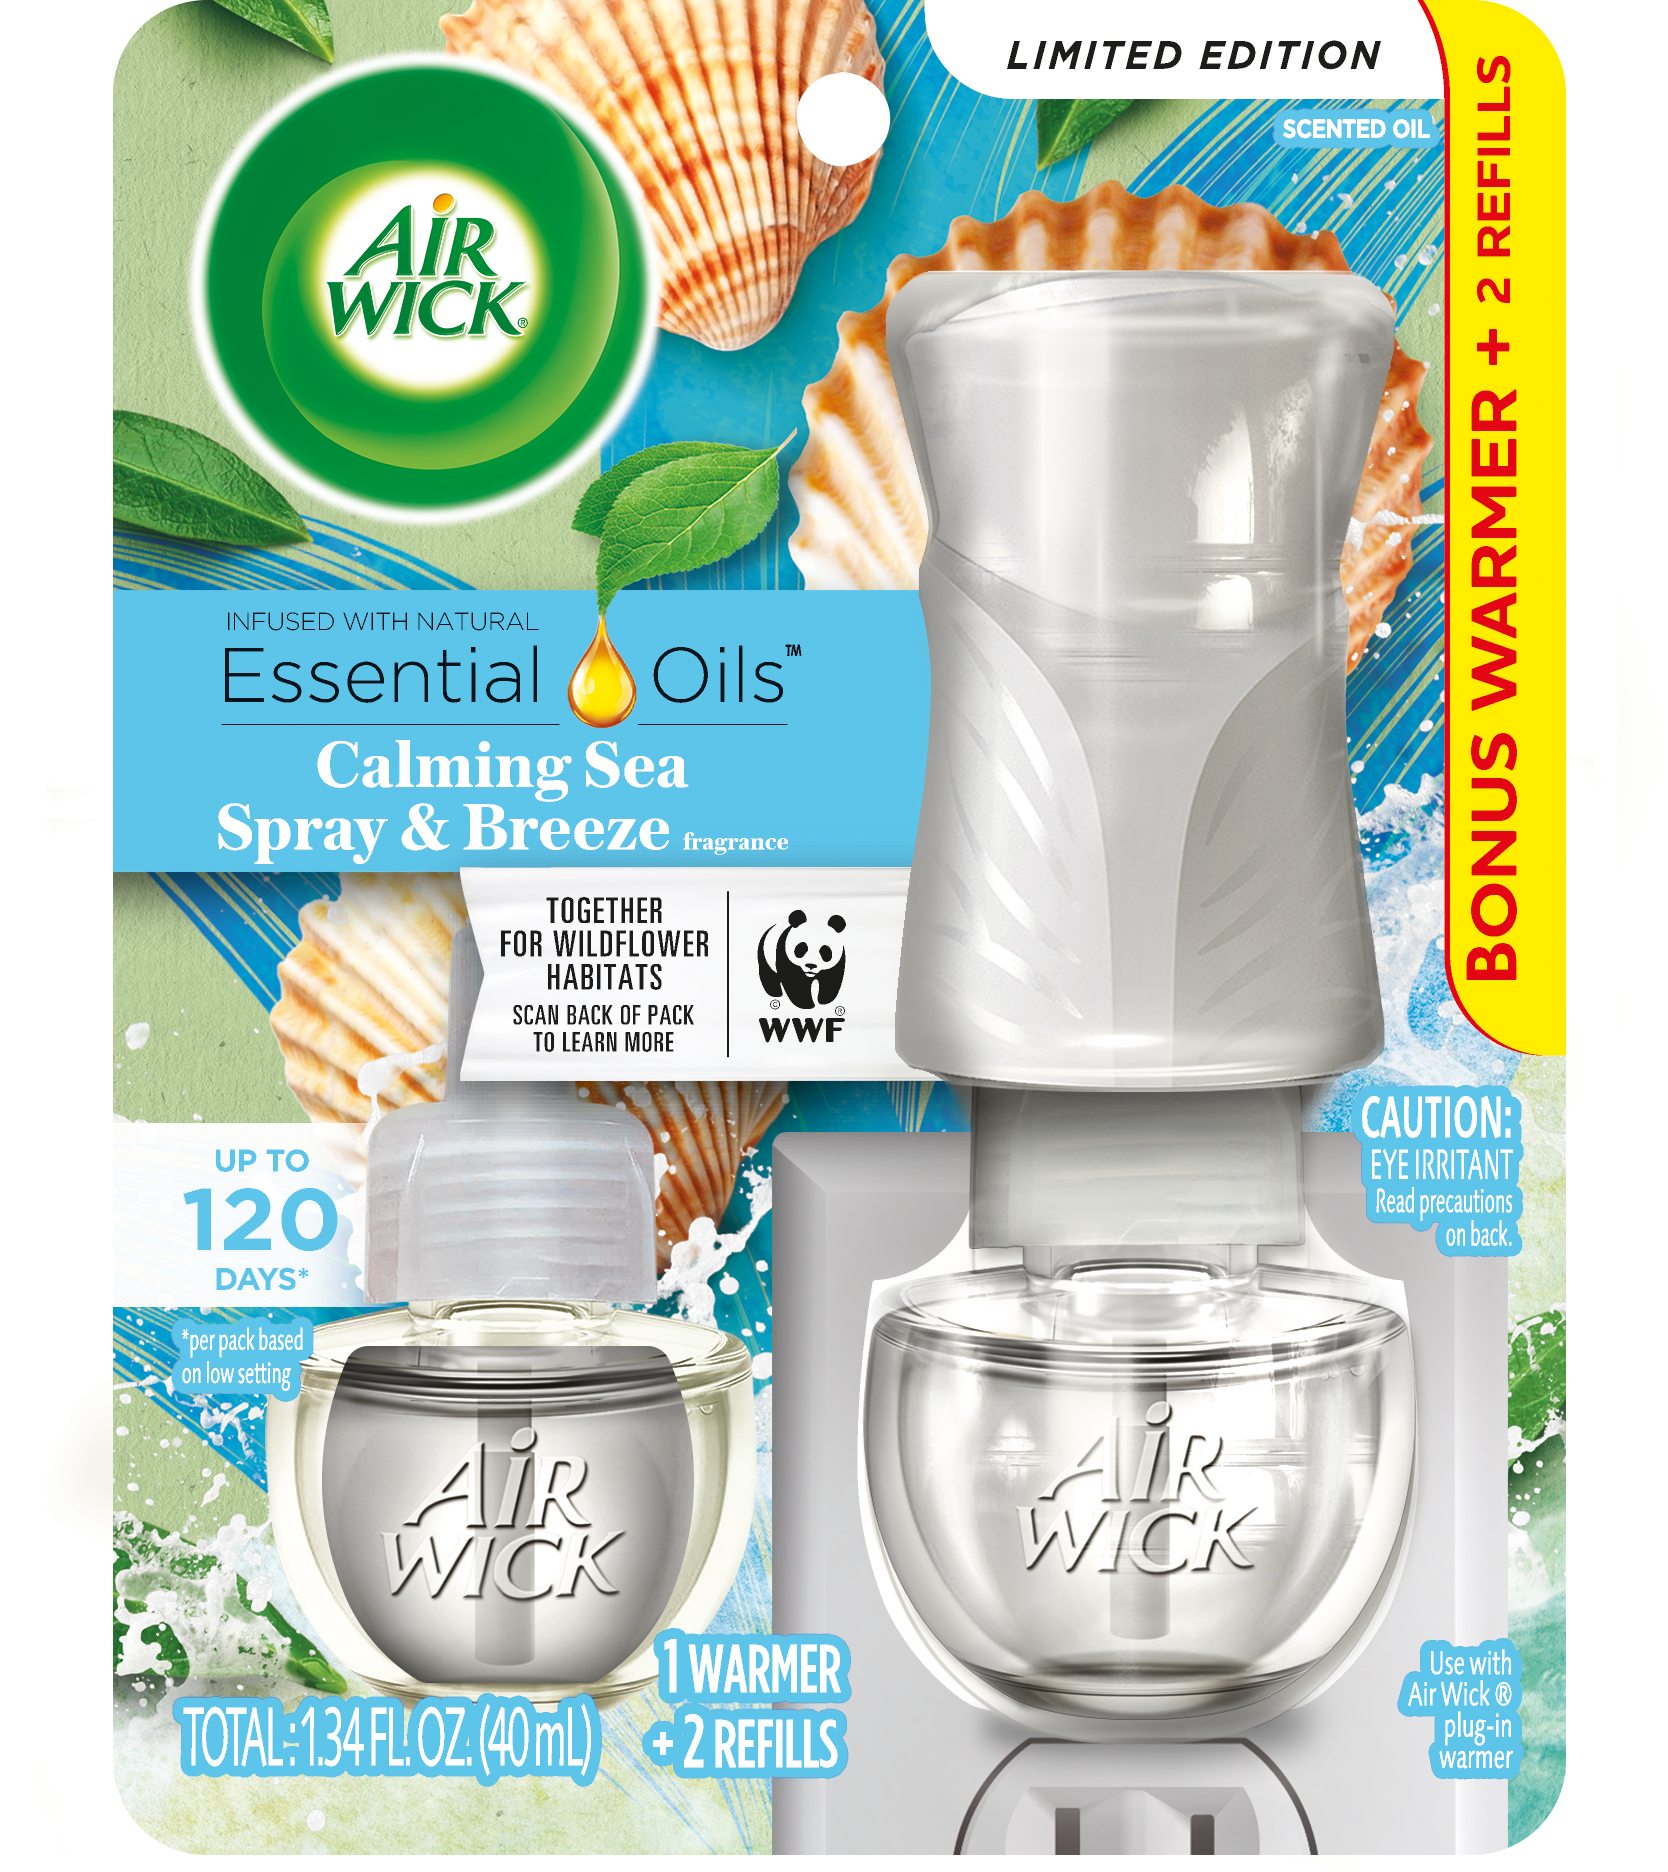 AIR WICK Scented Oil  Calming Sea Spray  Breeze  Kit